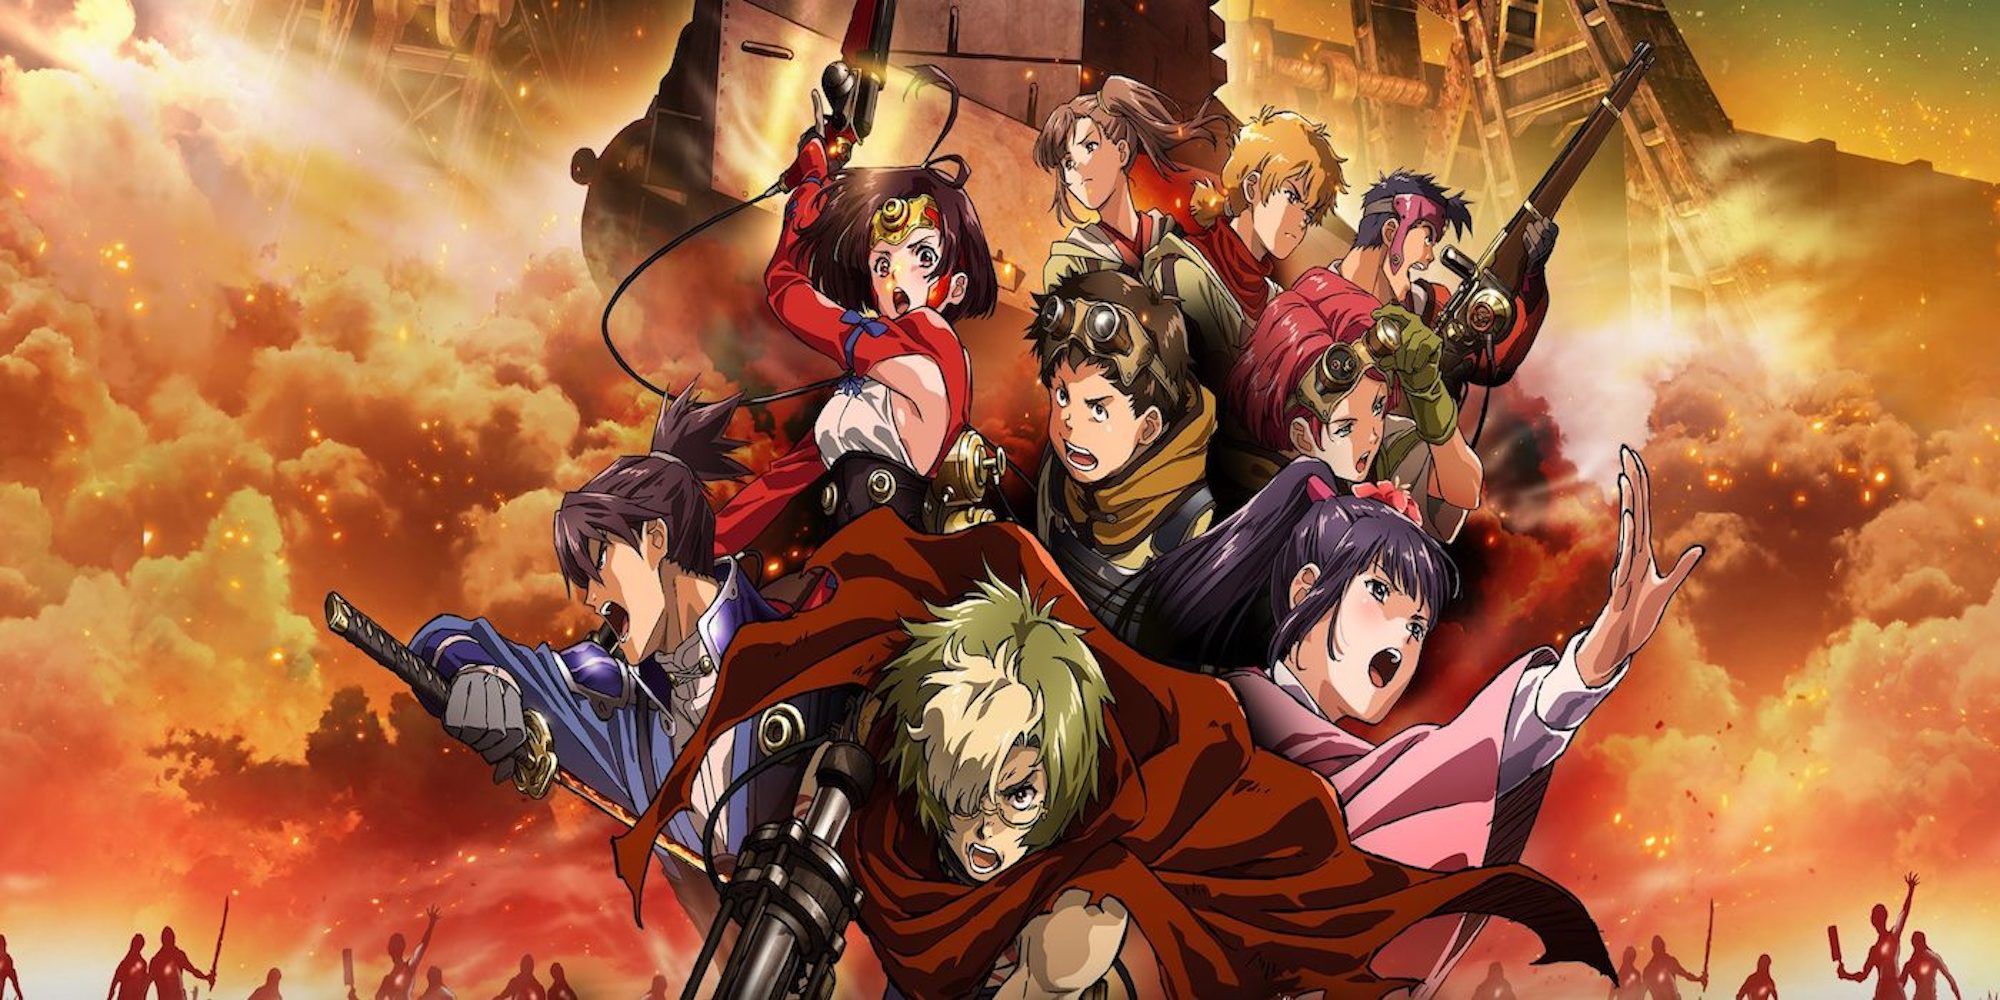 Promo art featuring characters from Kabaneri Of The Iron Fortress